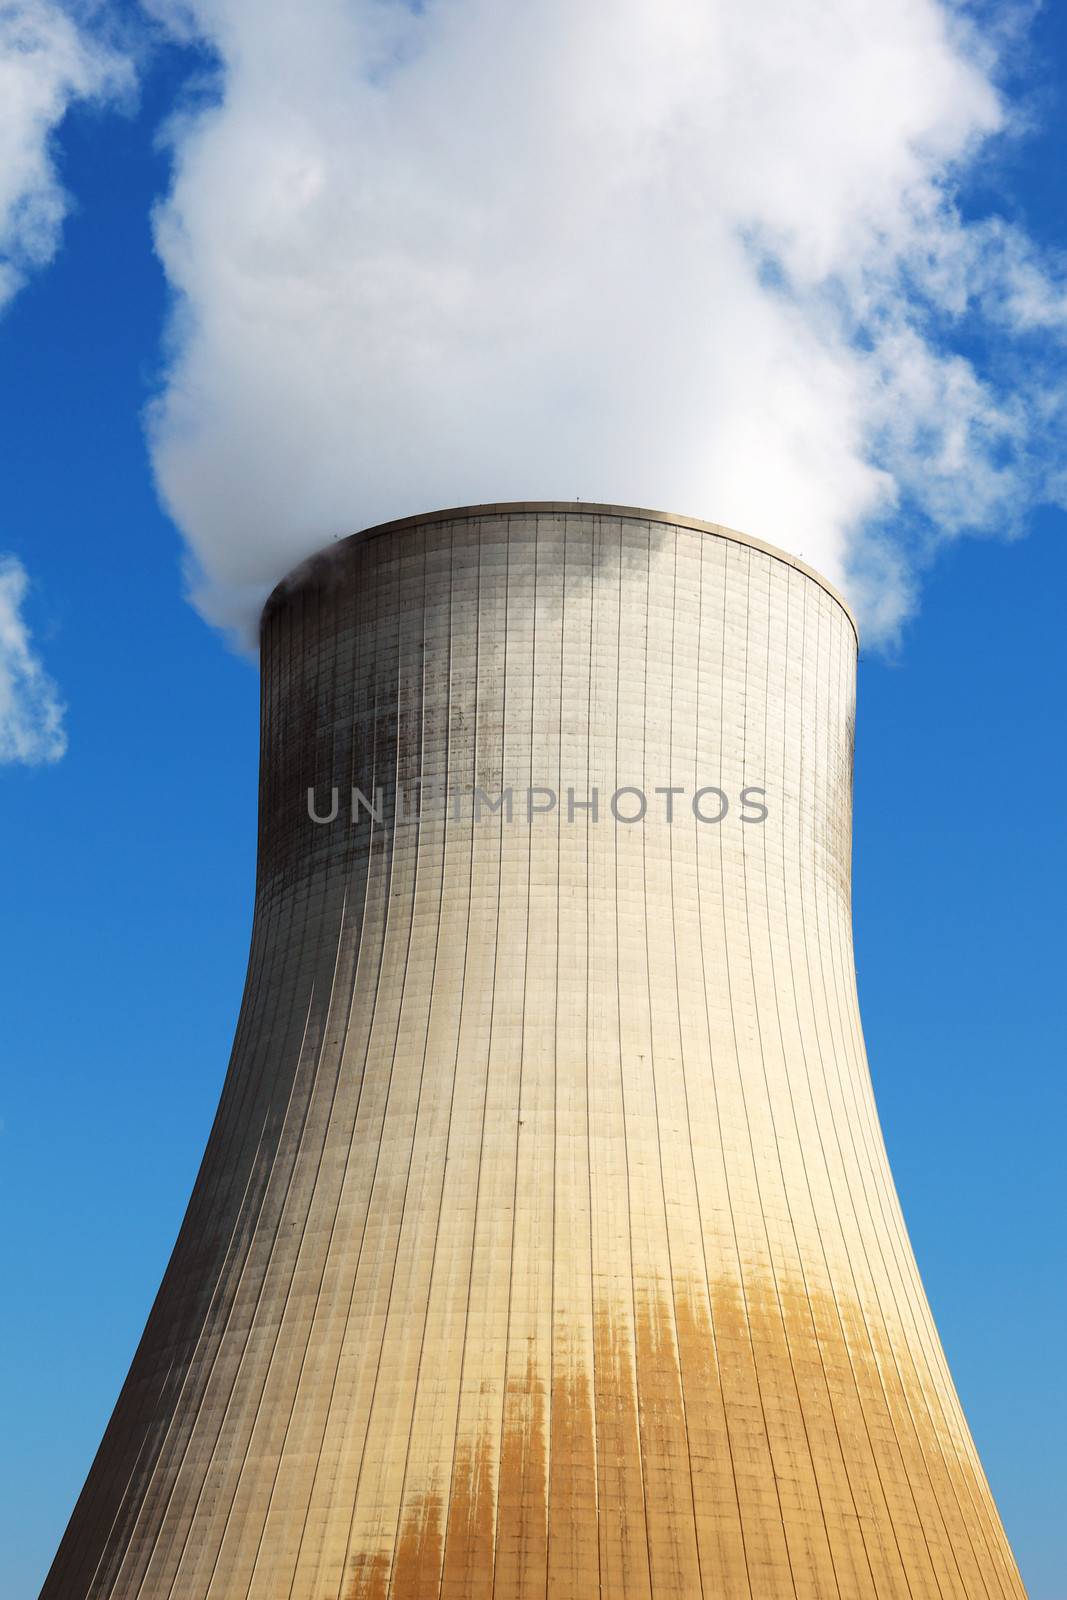 Nuclear power station cooling tower by vwalakte